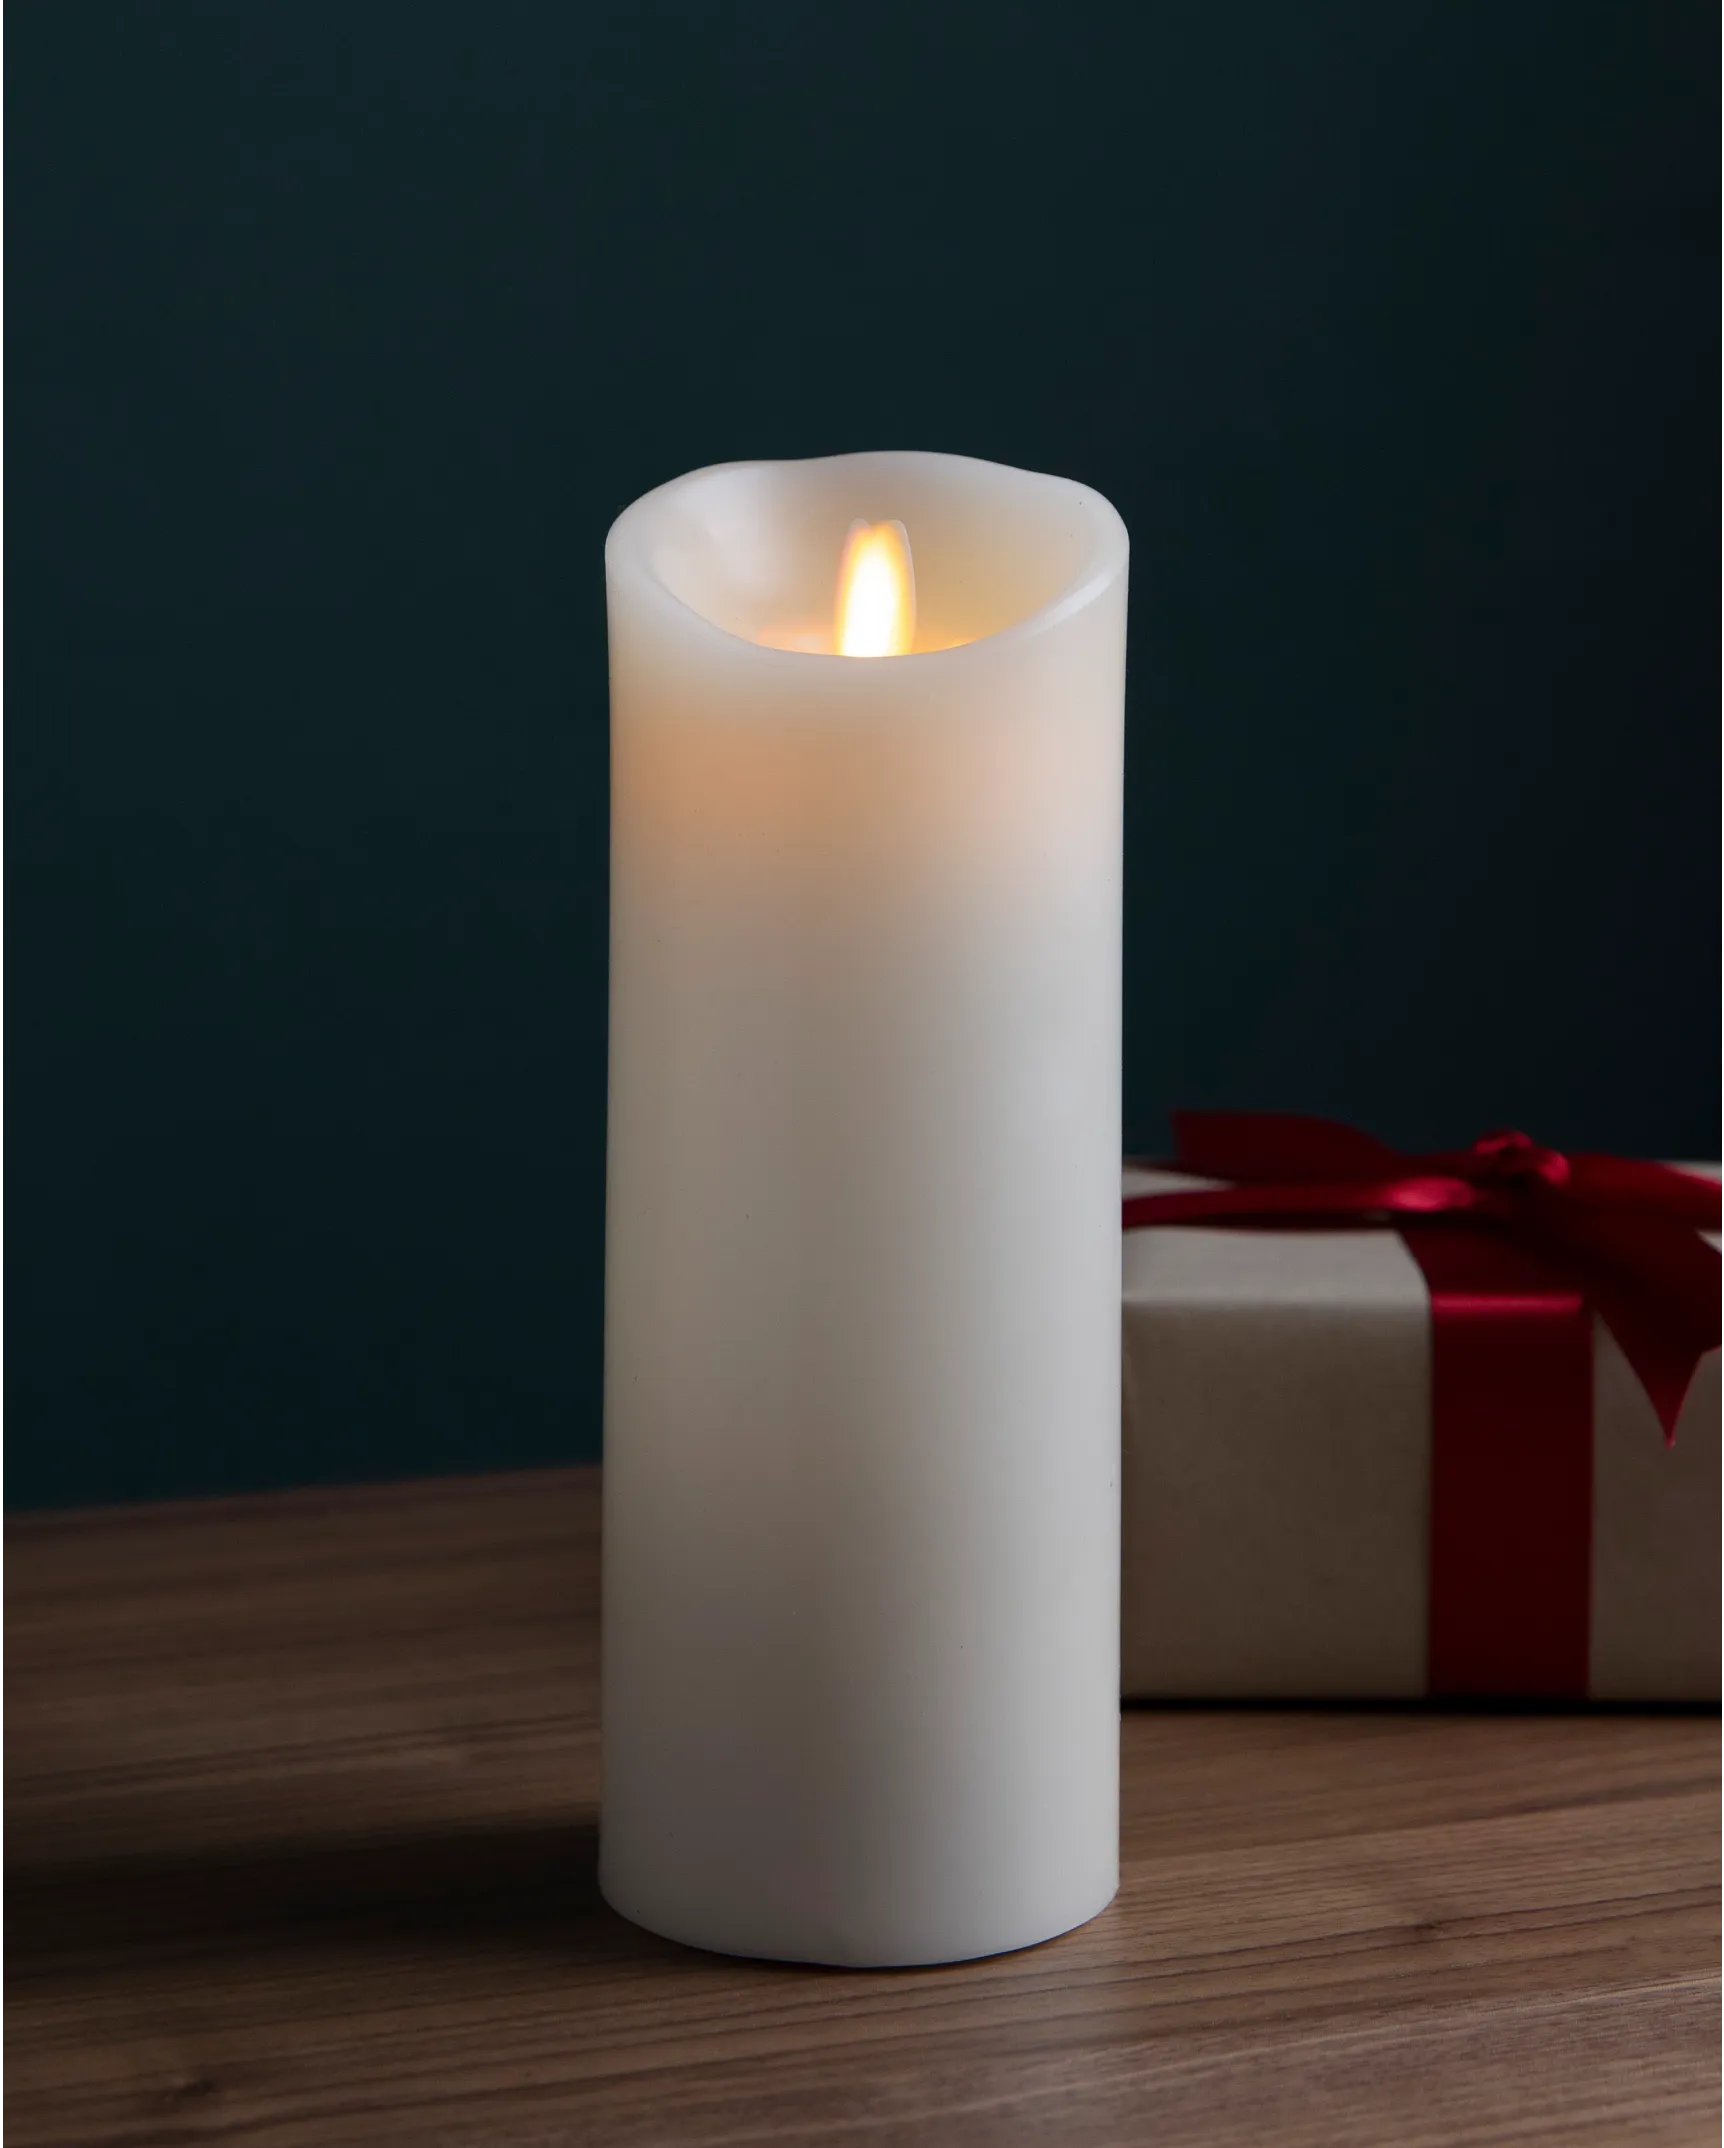 Premium Photo  Power outages concept, three candles, one with